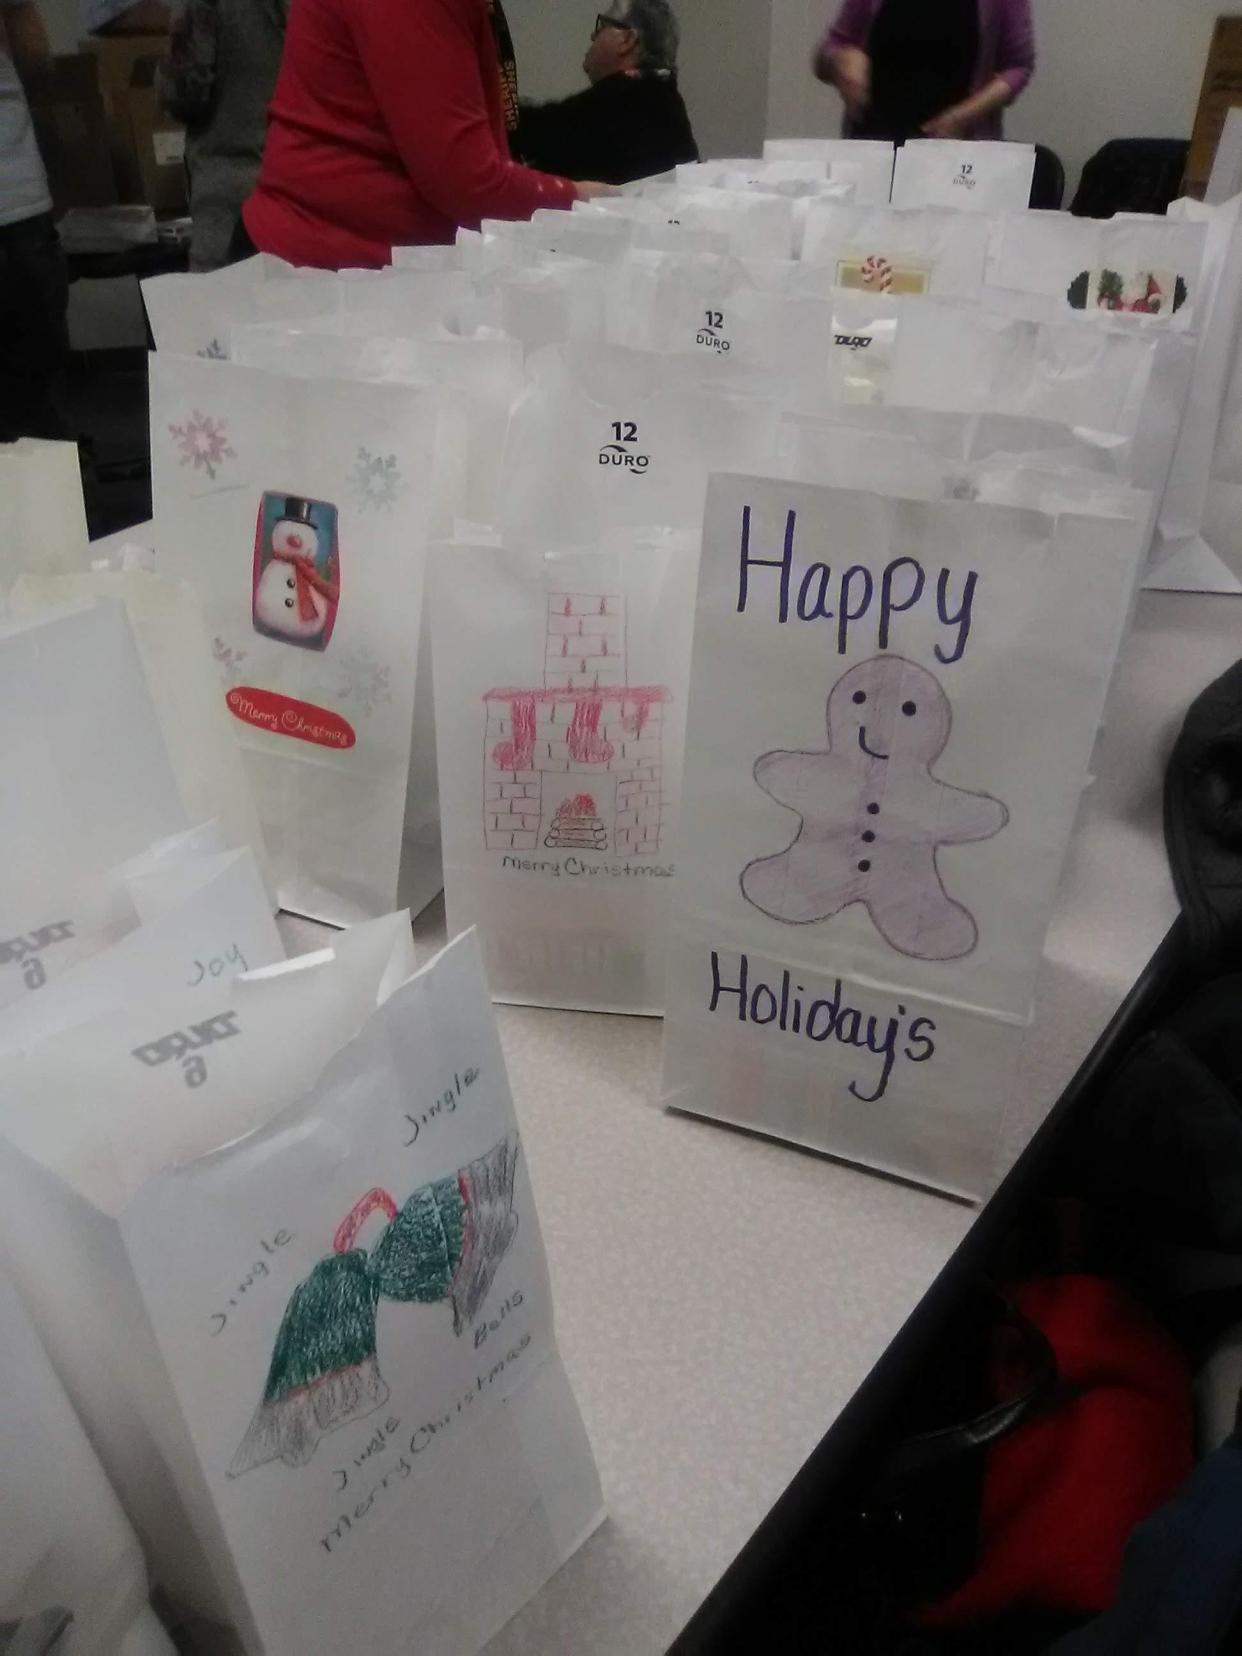 Volunteers will prepare gifts for the people in the Broome County jail and their children this holiday season.